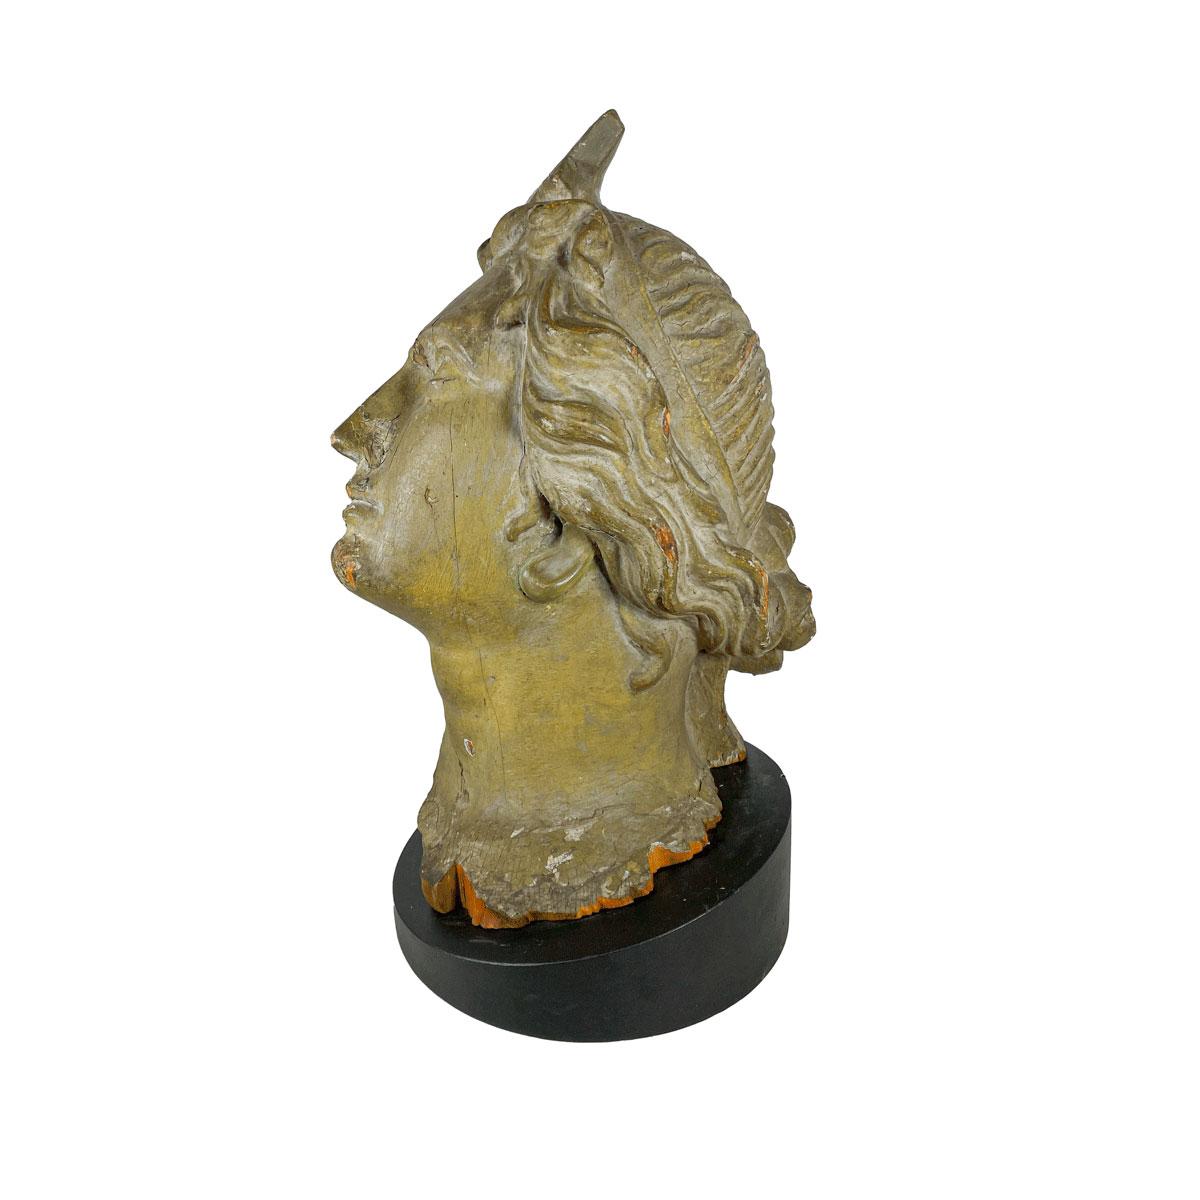 Folk Art 19th American Carving in the Form of Lady Liberty's Head